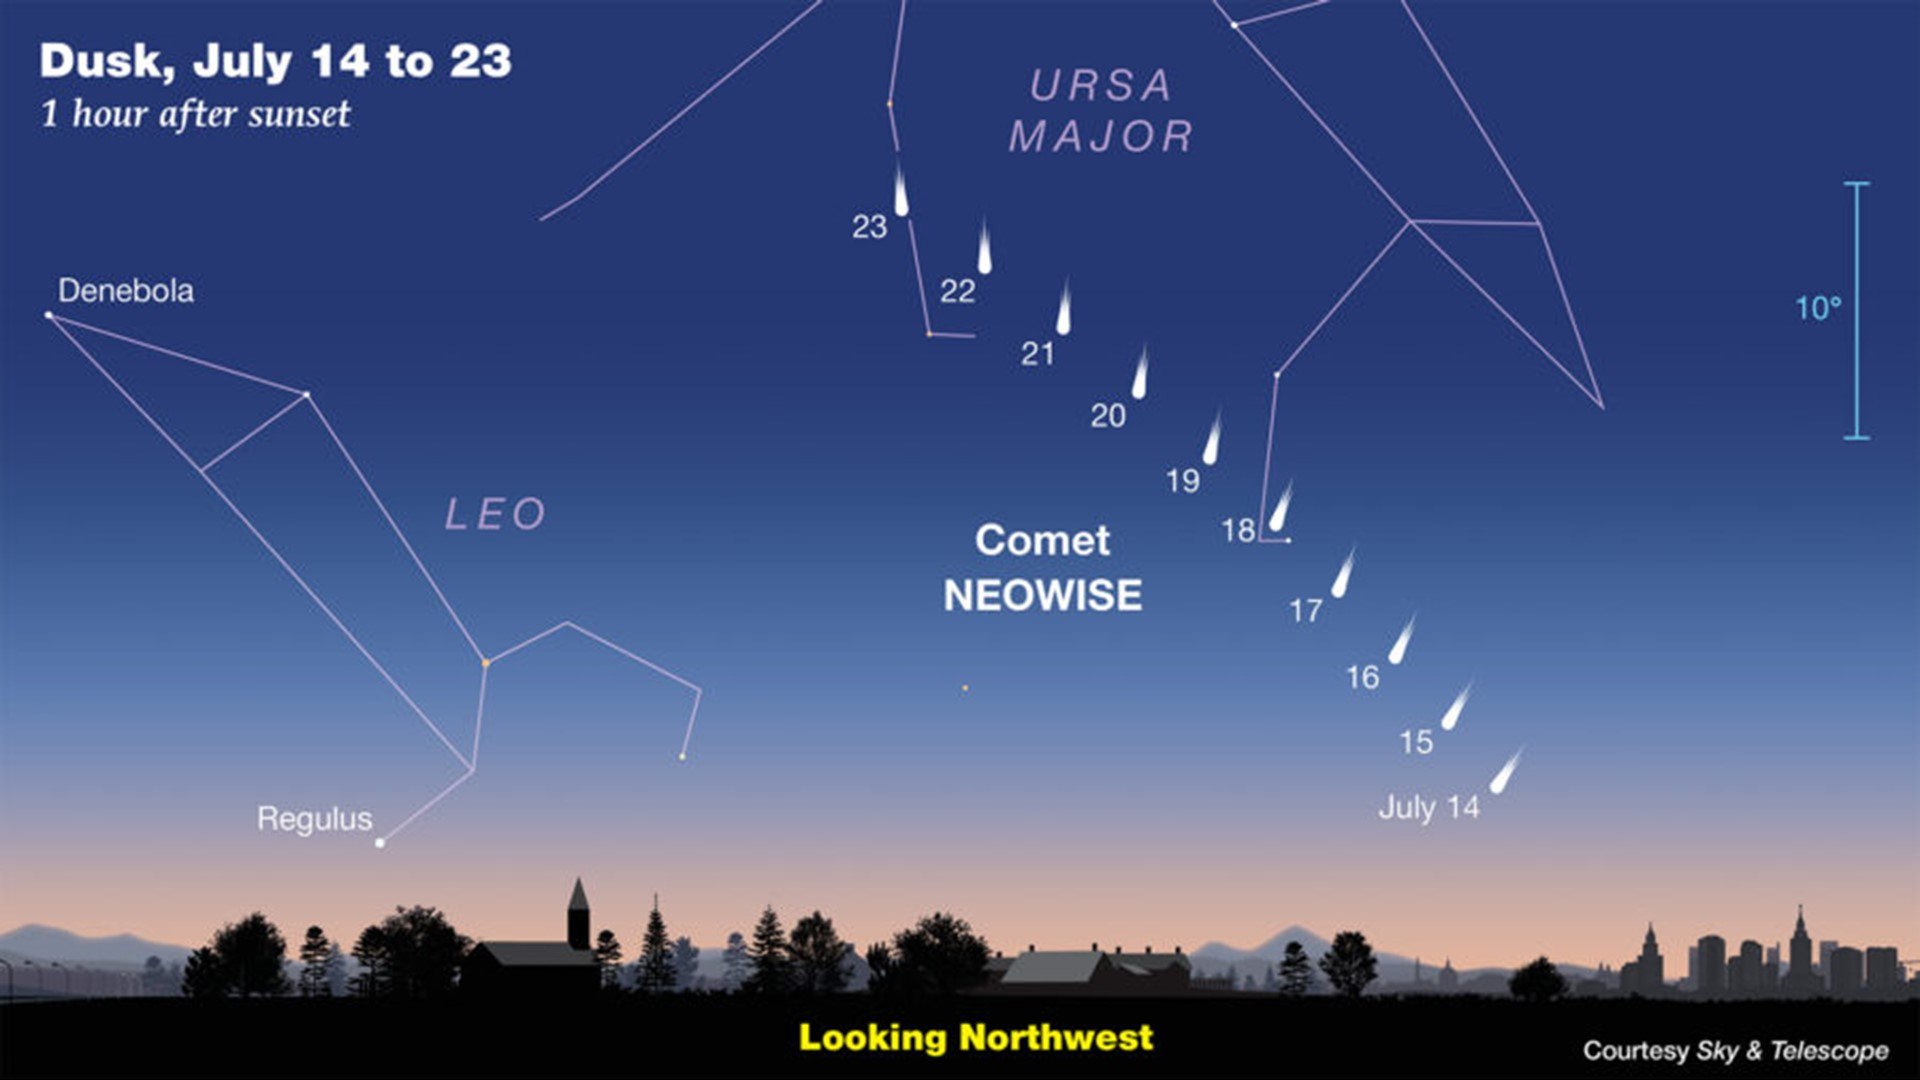 It’s a great week for tracking comet Neowise The Boston Globe